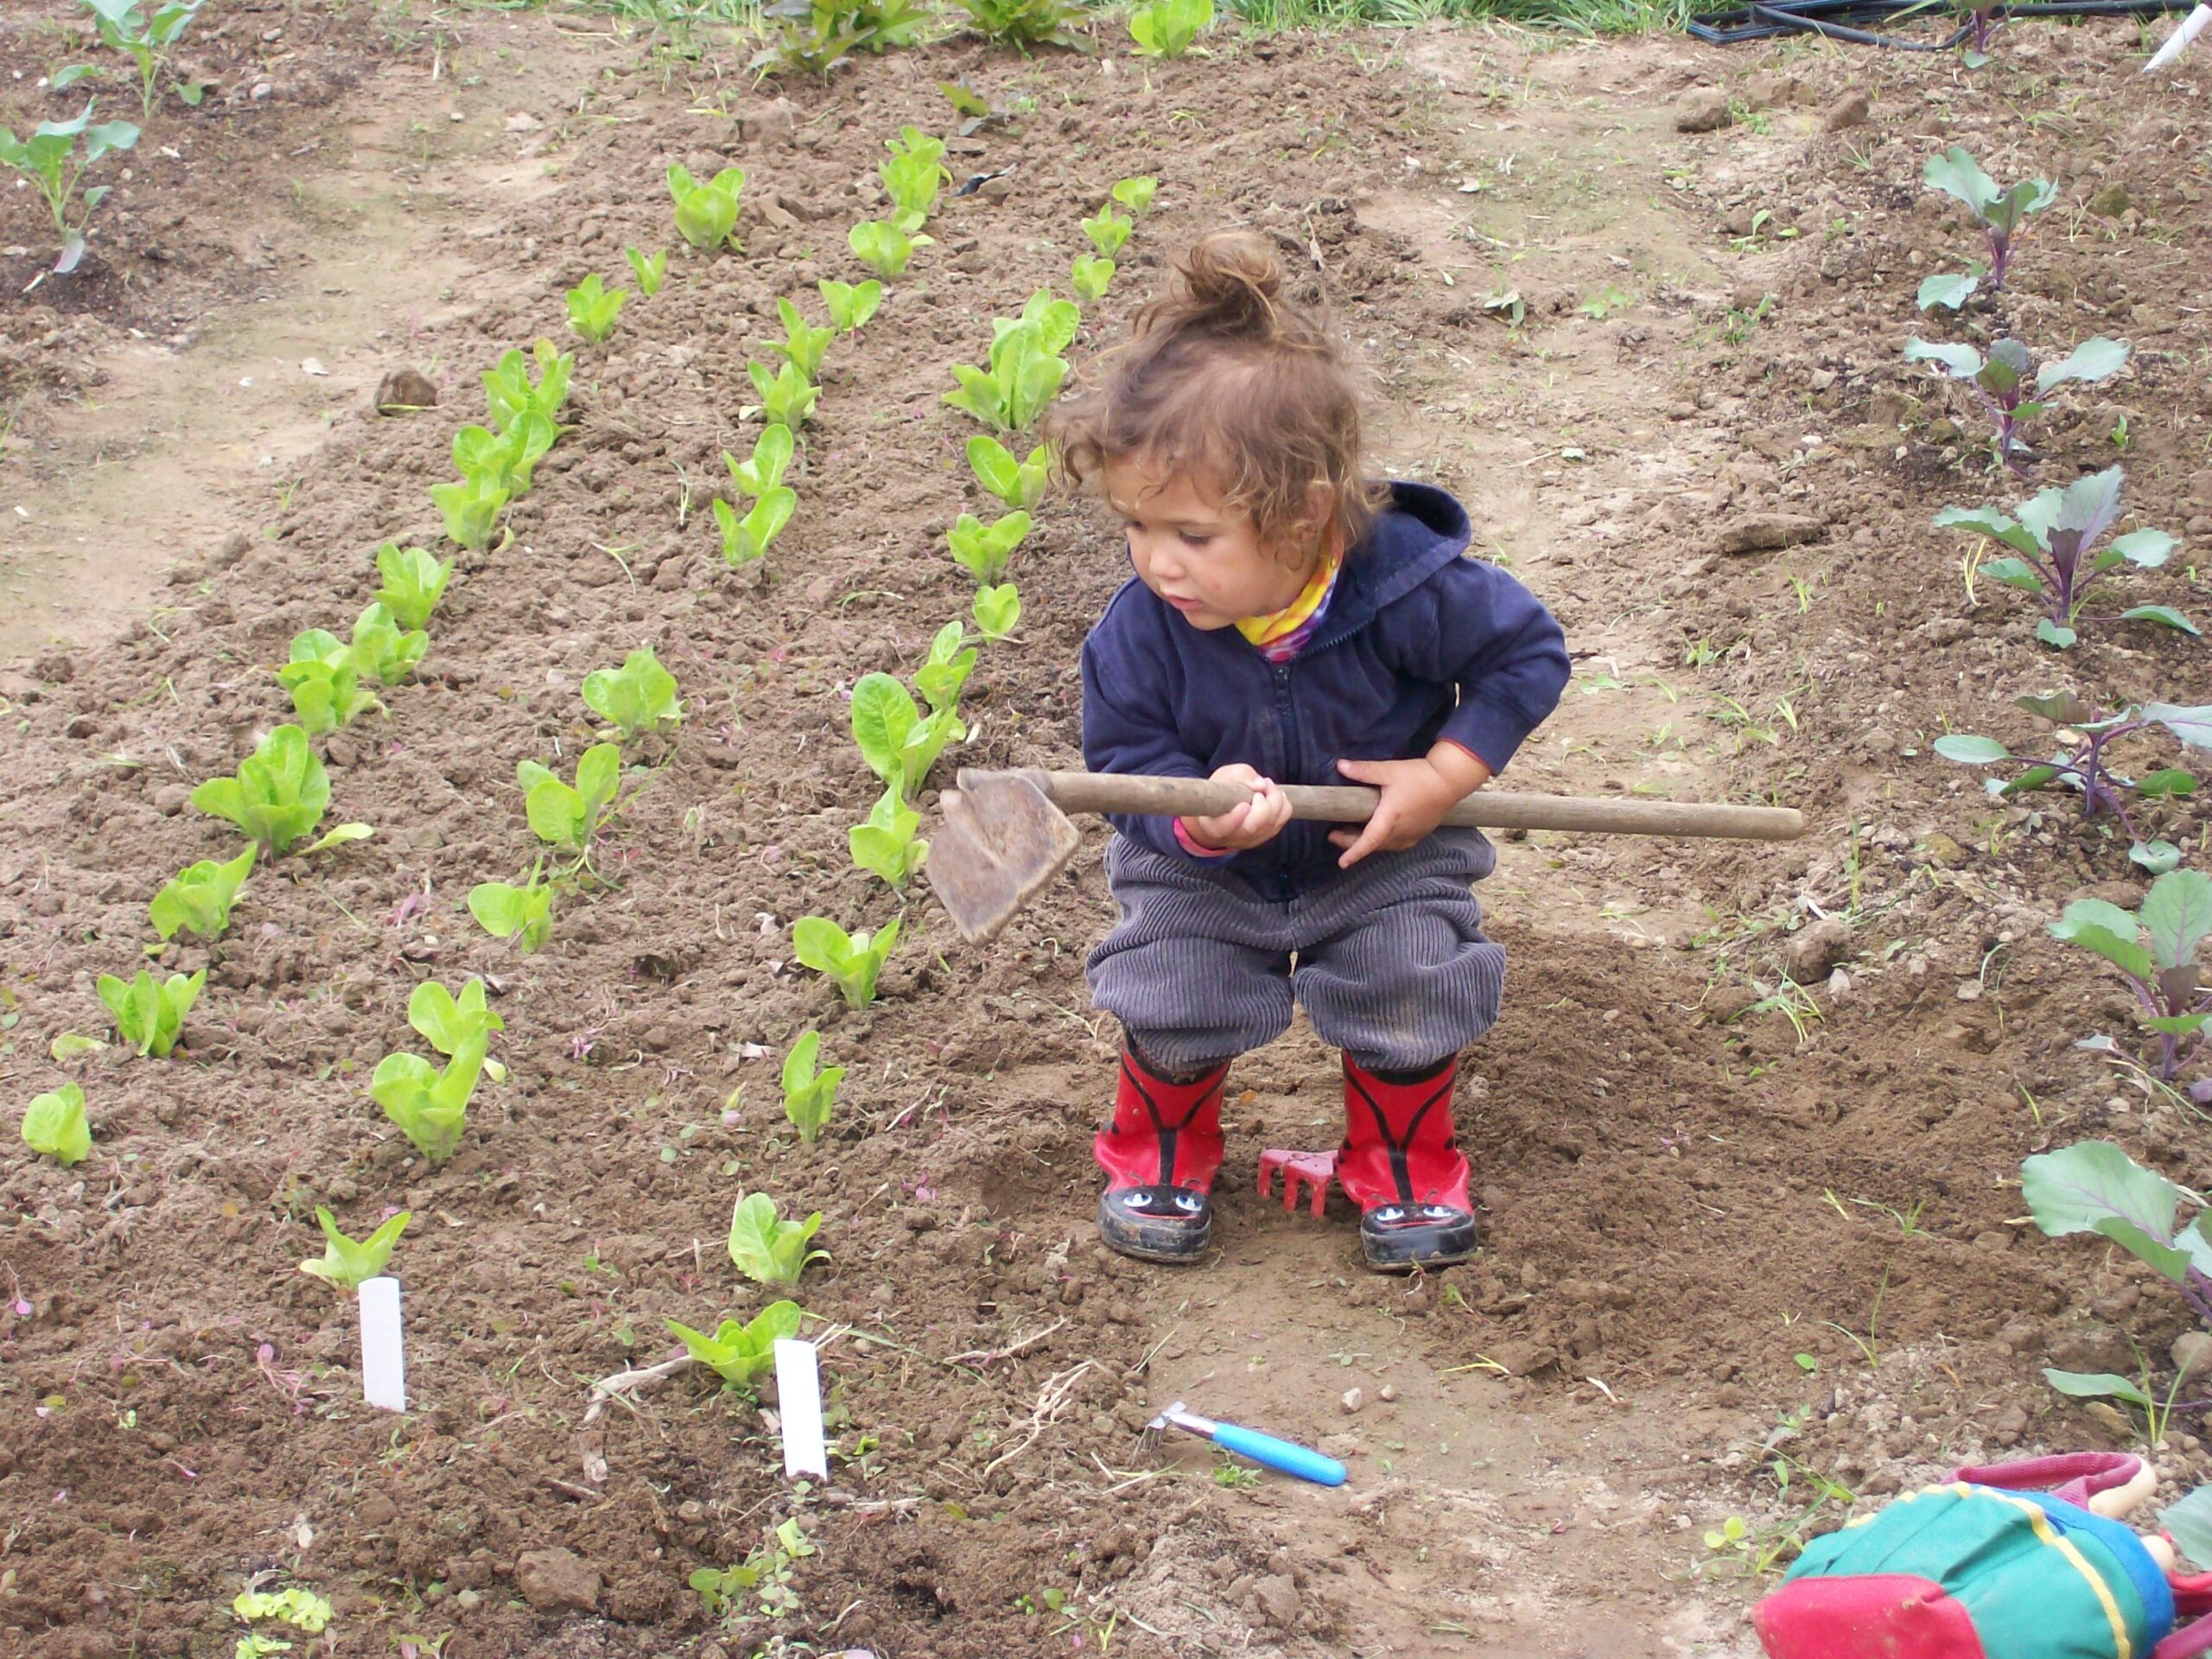 Child with a hoe in between rows of lettuce and cabbage seedlings